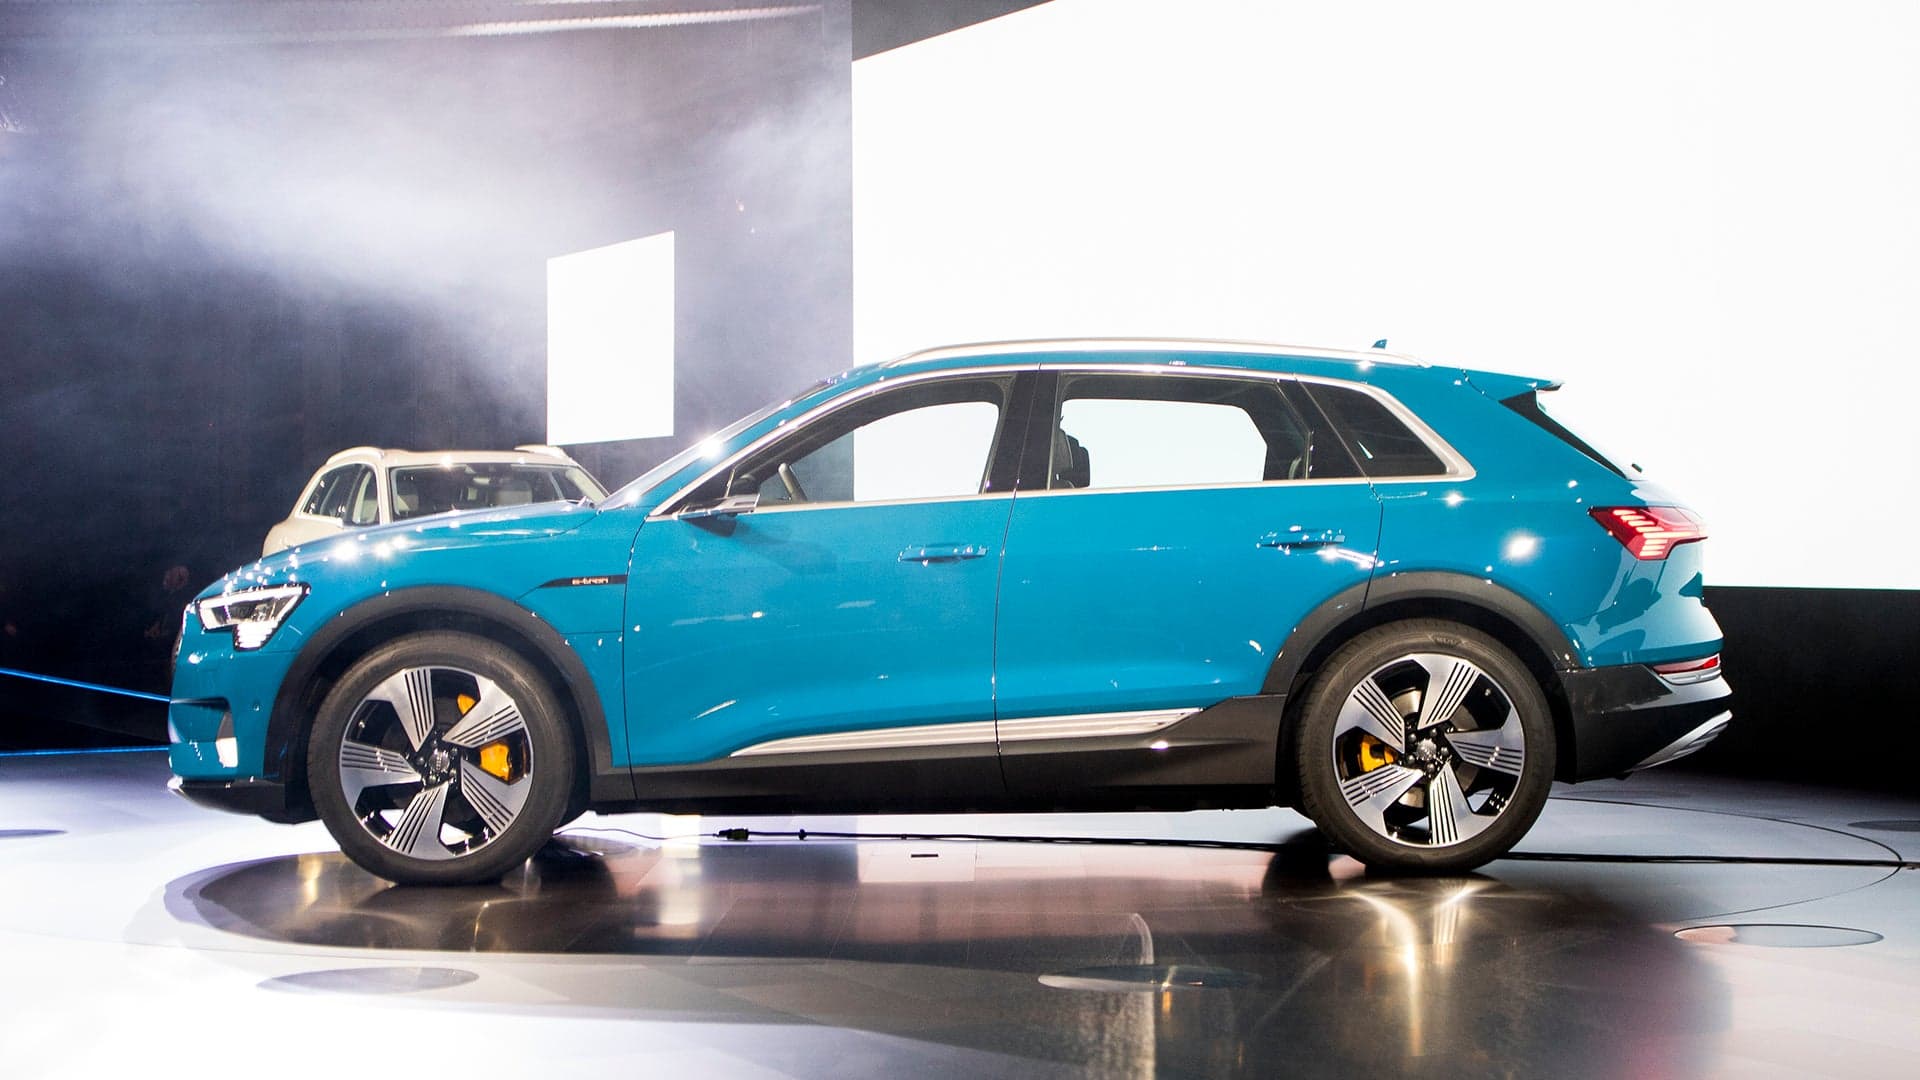 The All-Electric 2019 Audi E-tron Is a $74,800 Warning Shot Across Tesla’s Bow